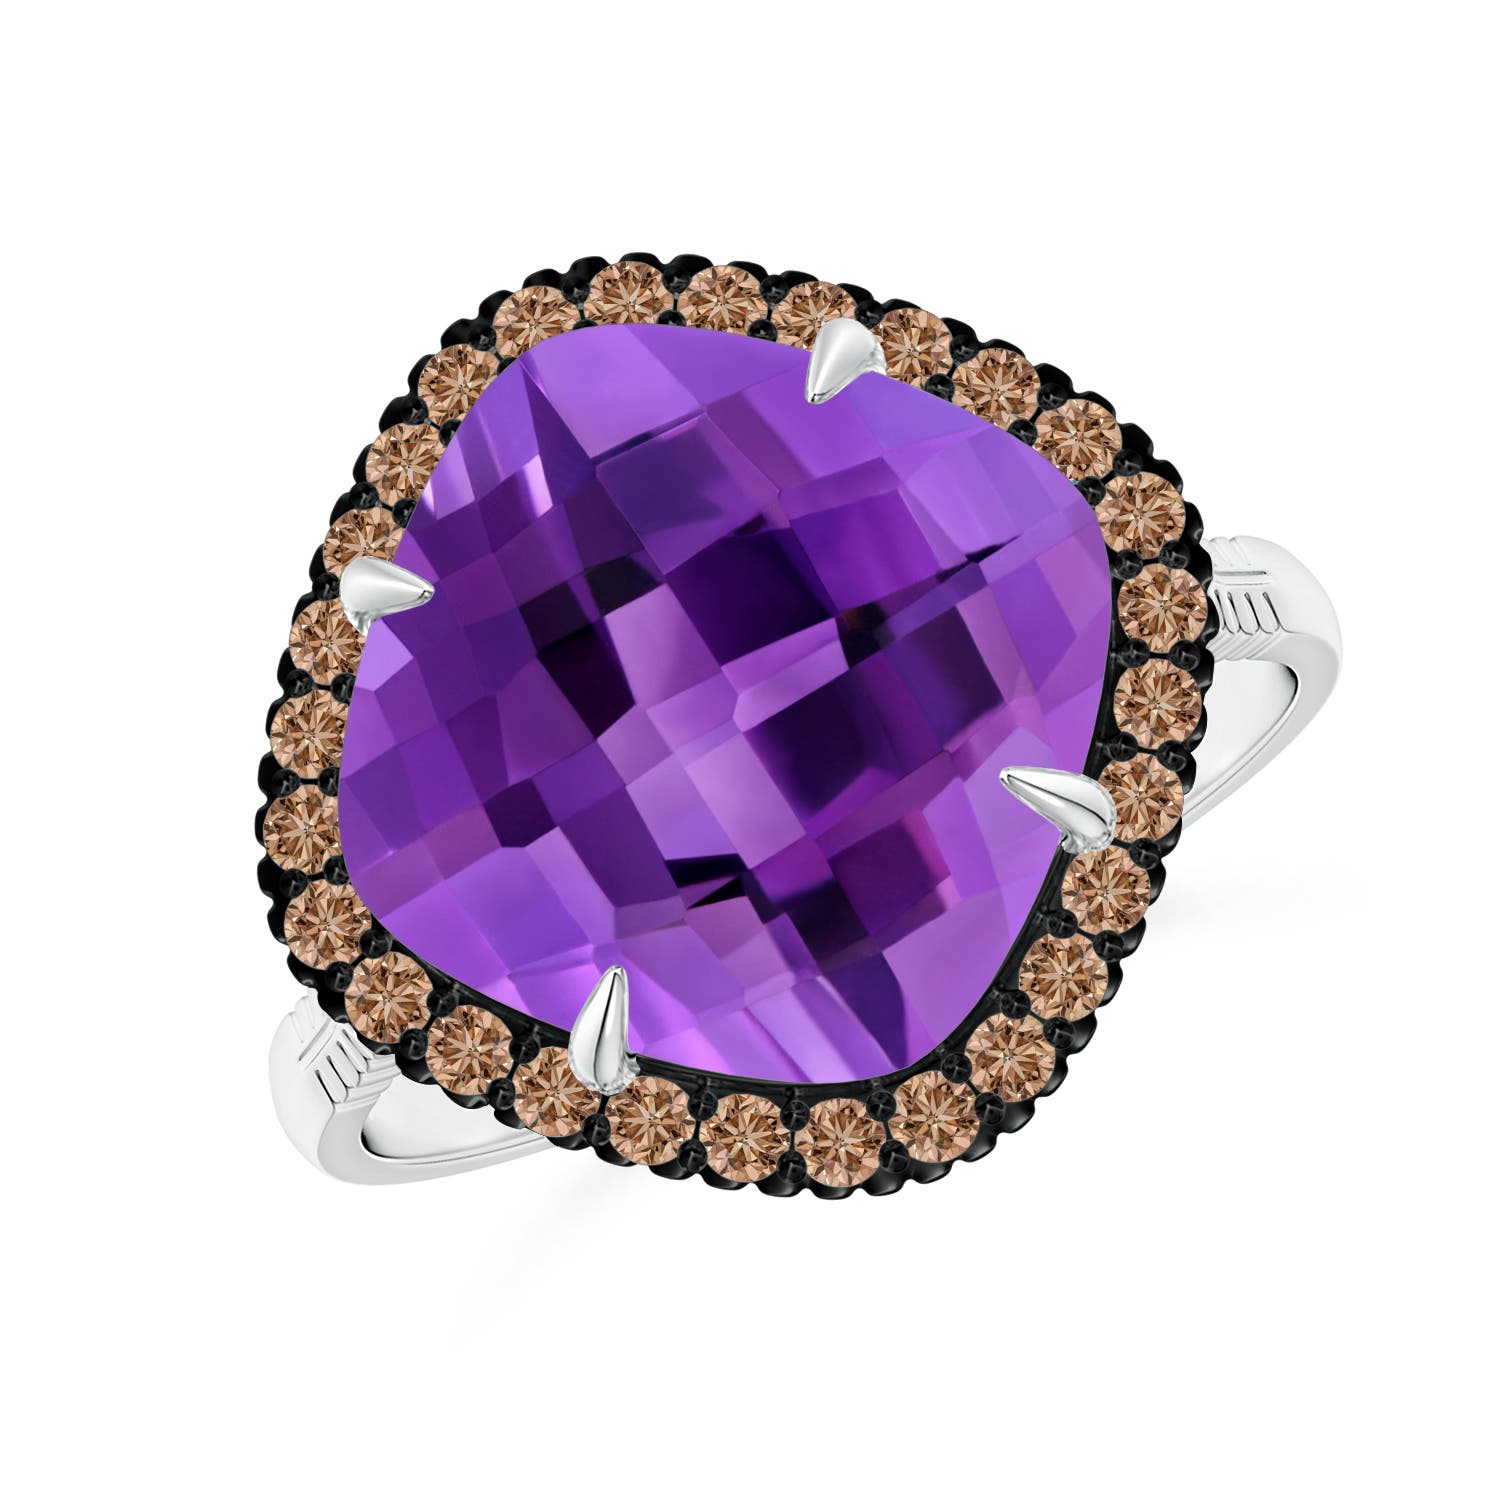 AAA - Amethyst / 4.98 CT / 14 KT White Gold